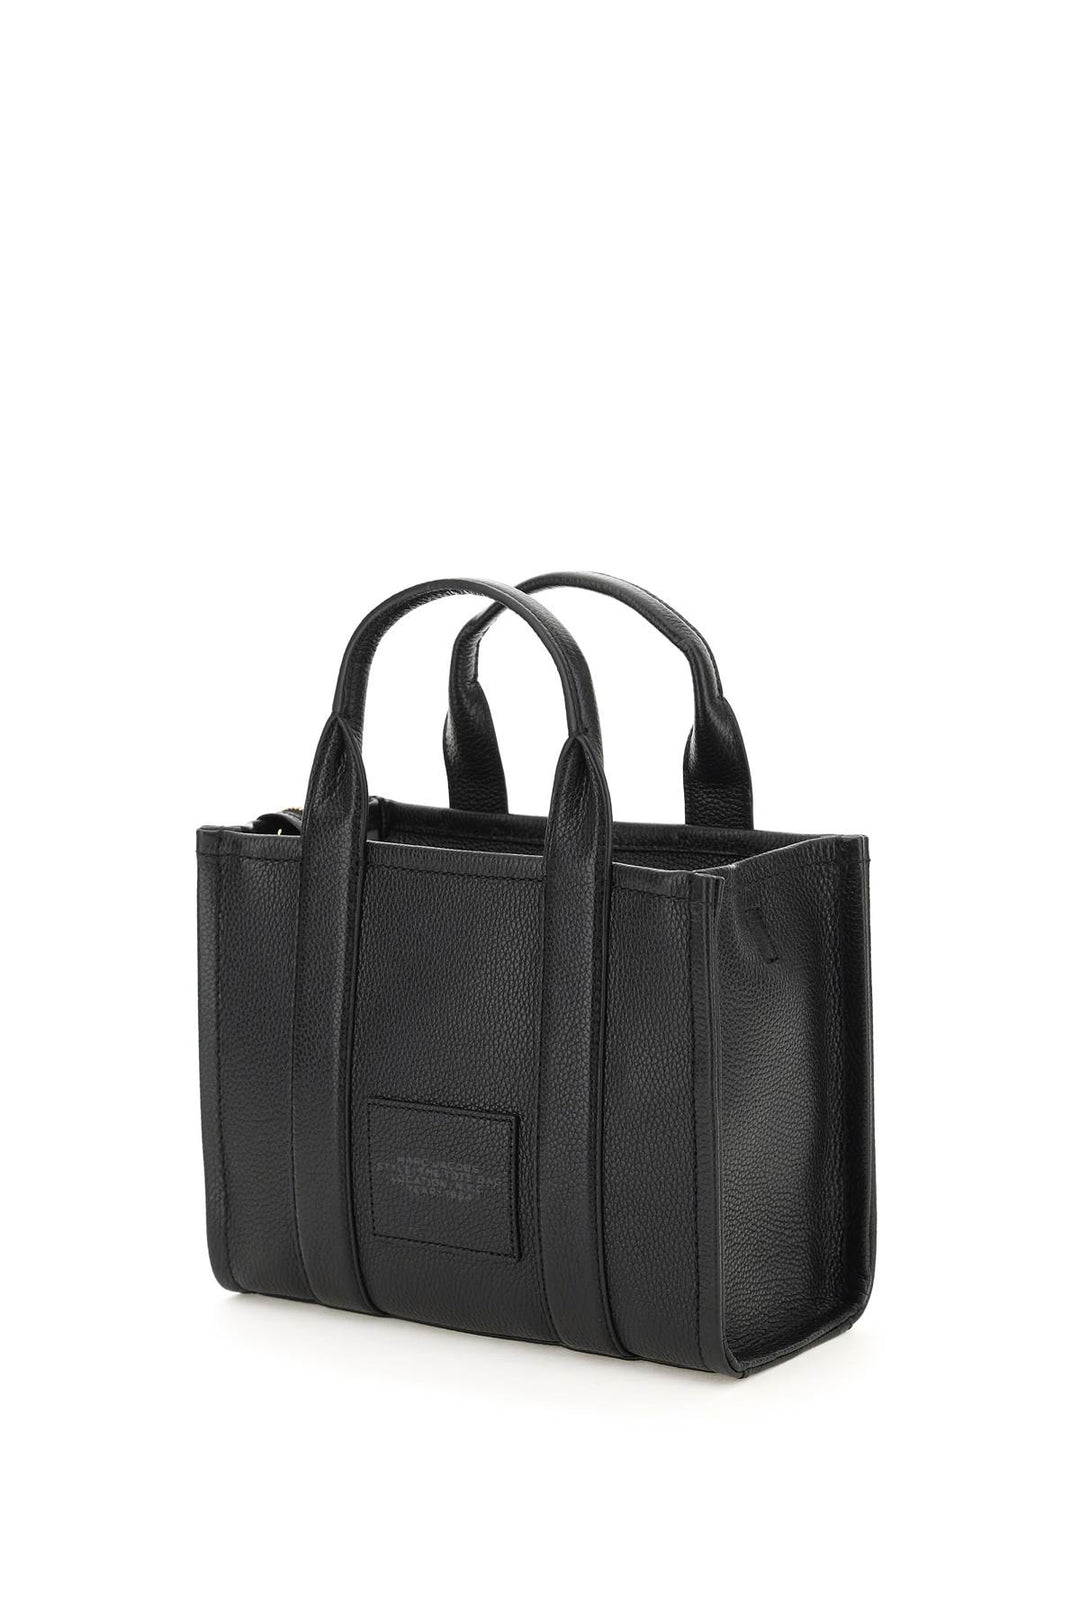 Marc Jacobs The Leather Small Tote Bag   Black